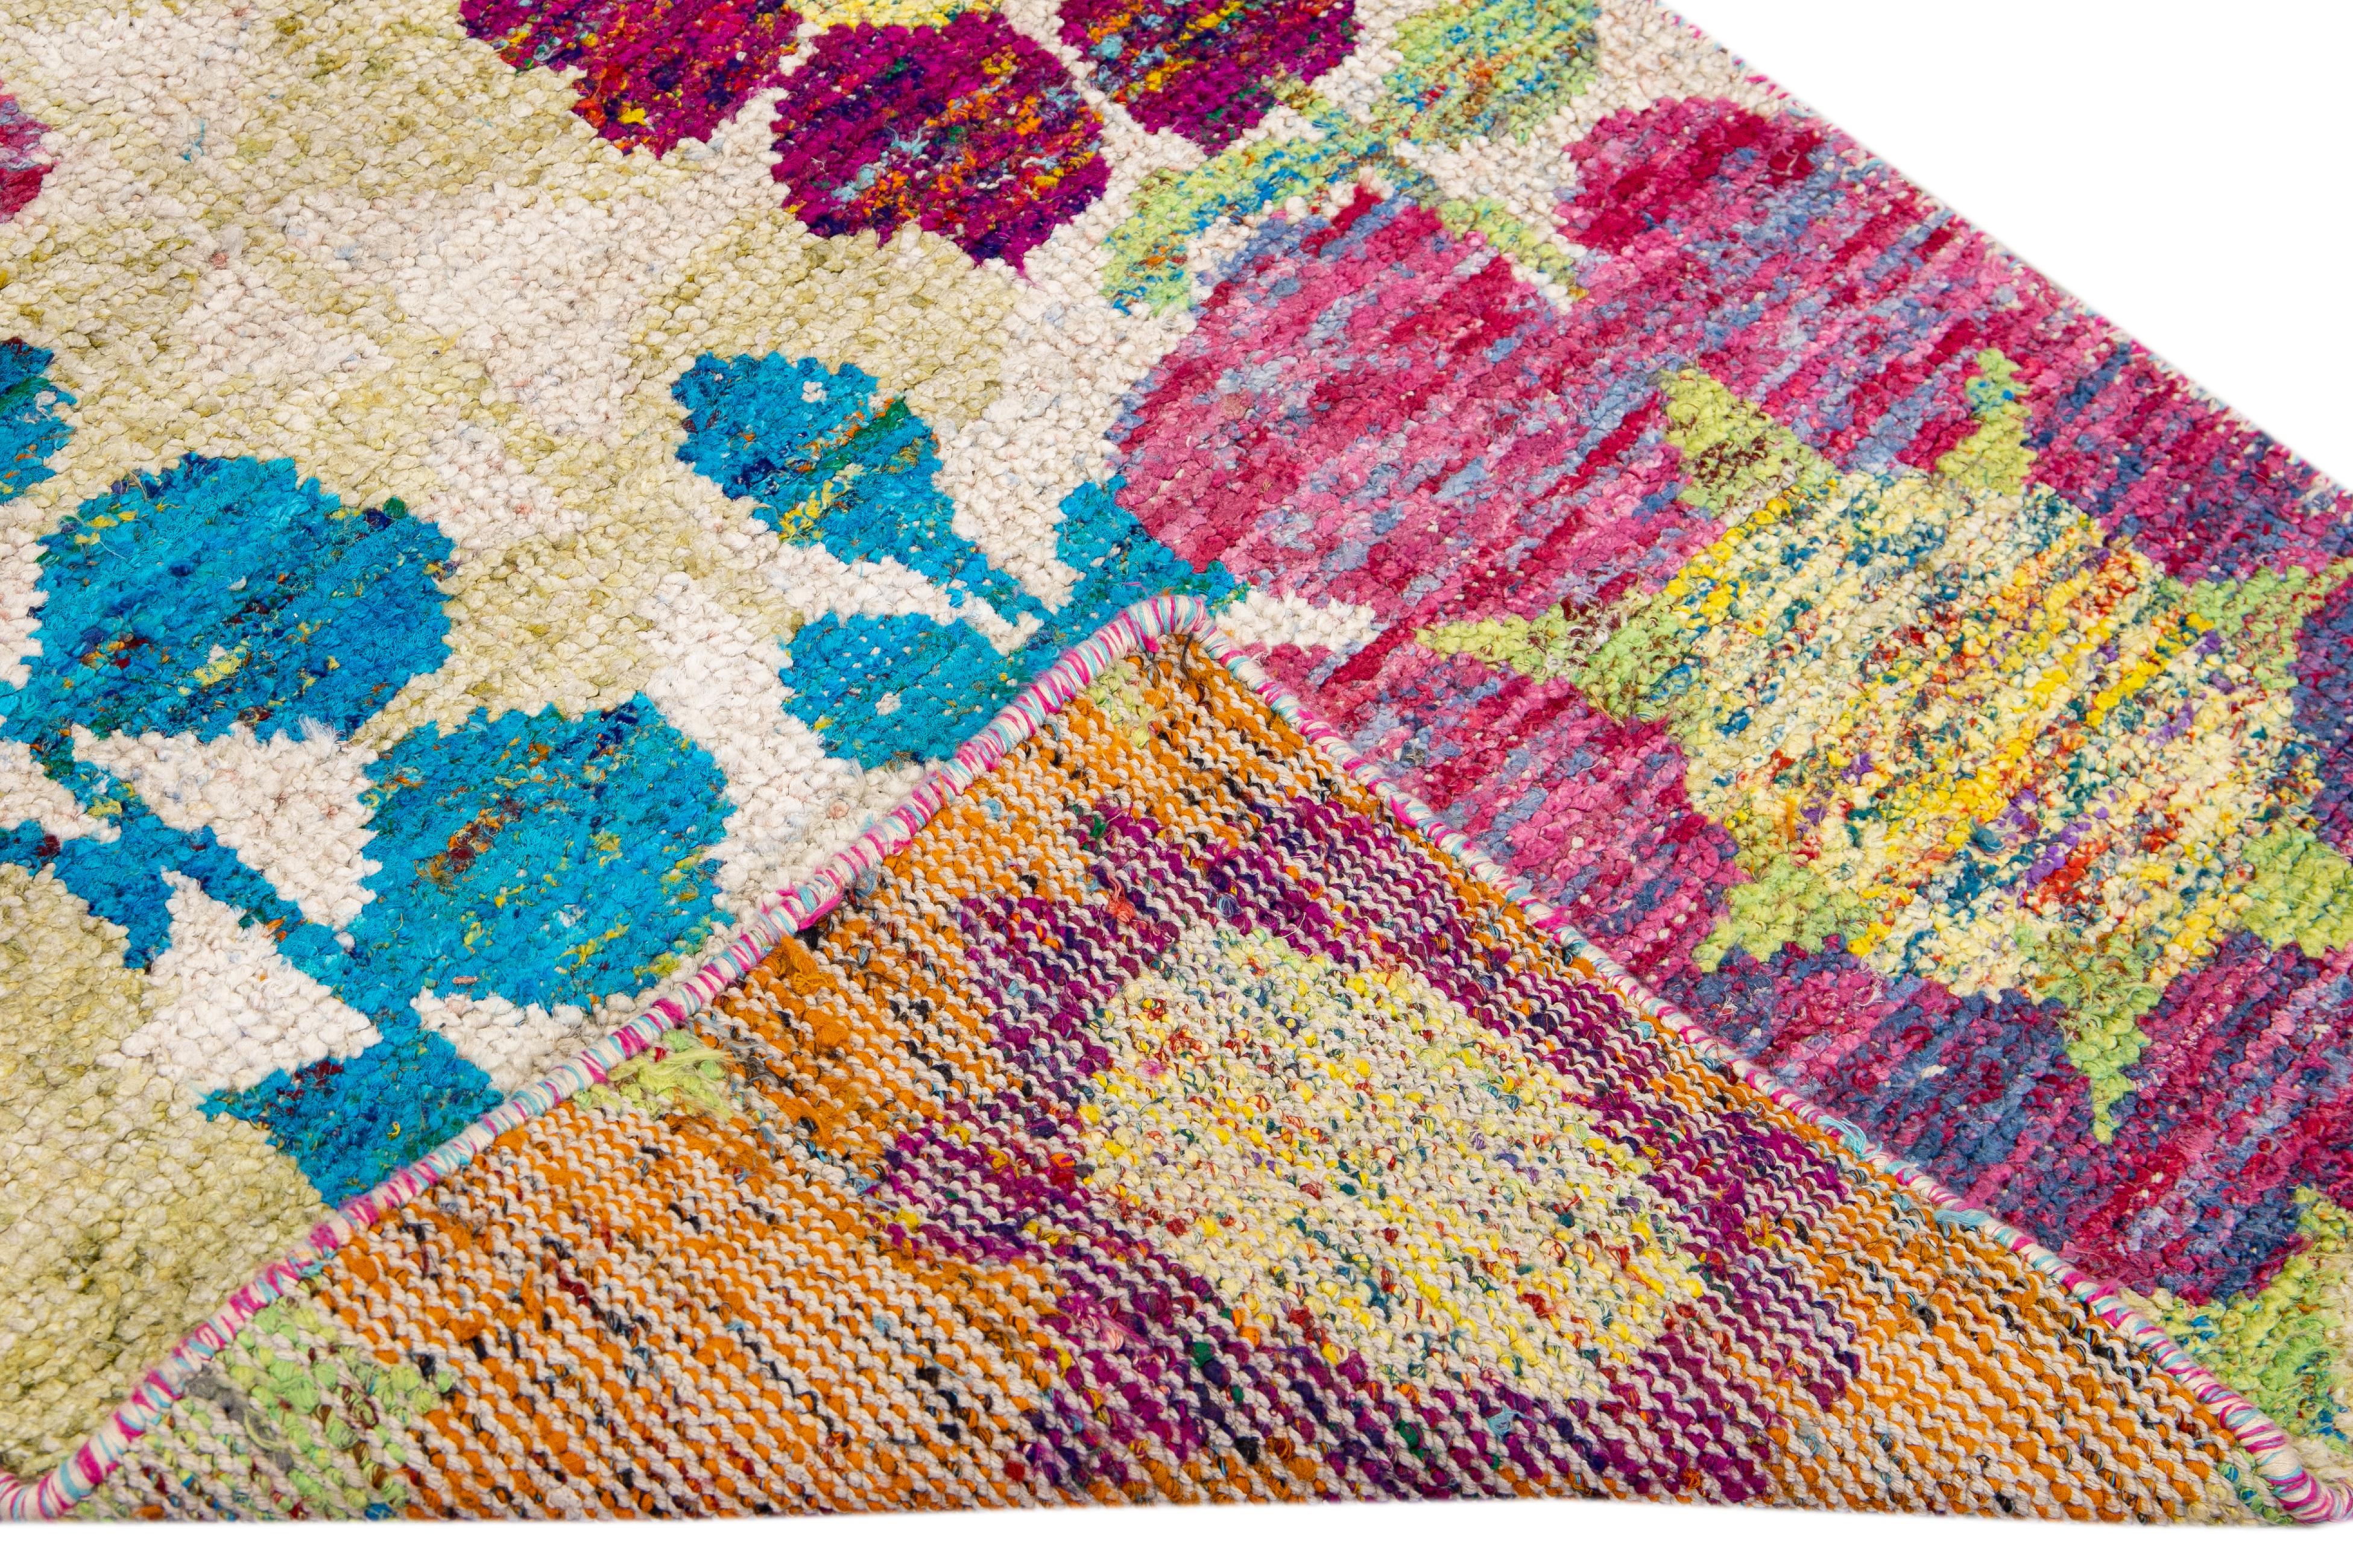 Beautiful modern Indian hand-knotted wool runner with a beige field. This modern rug has orange, yellow, green, and blue accents gorgeous all-over geometric floral pattern design.

This rug measures: 3'1